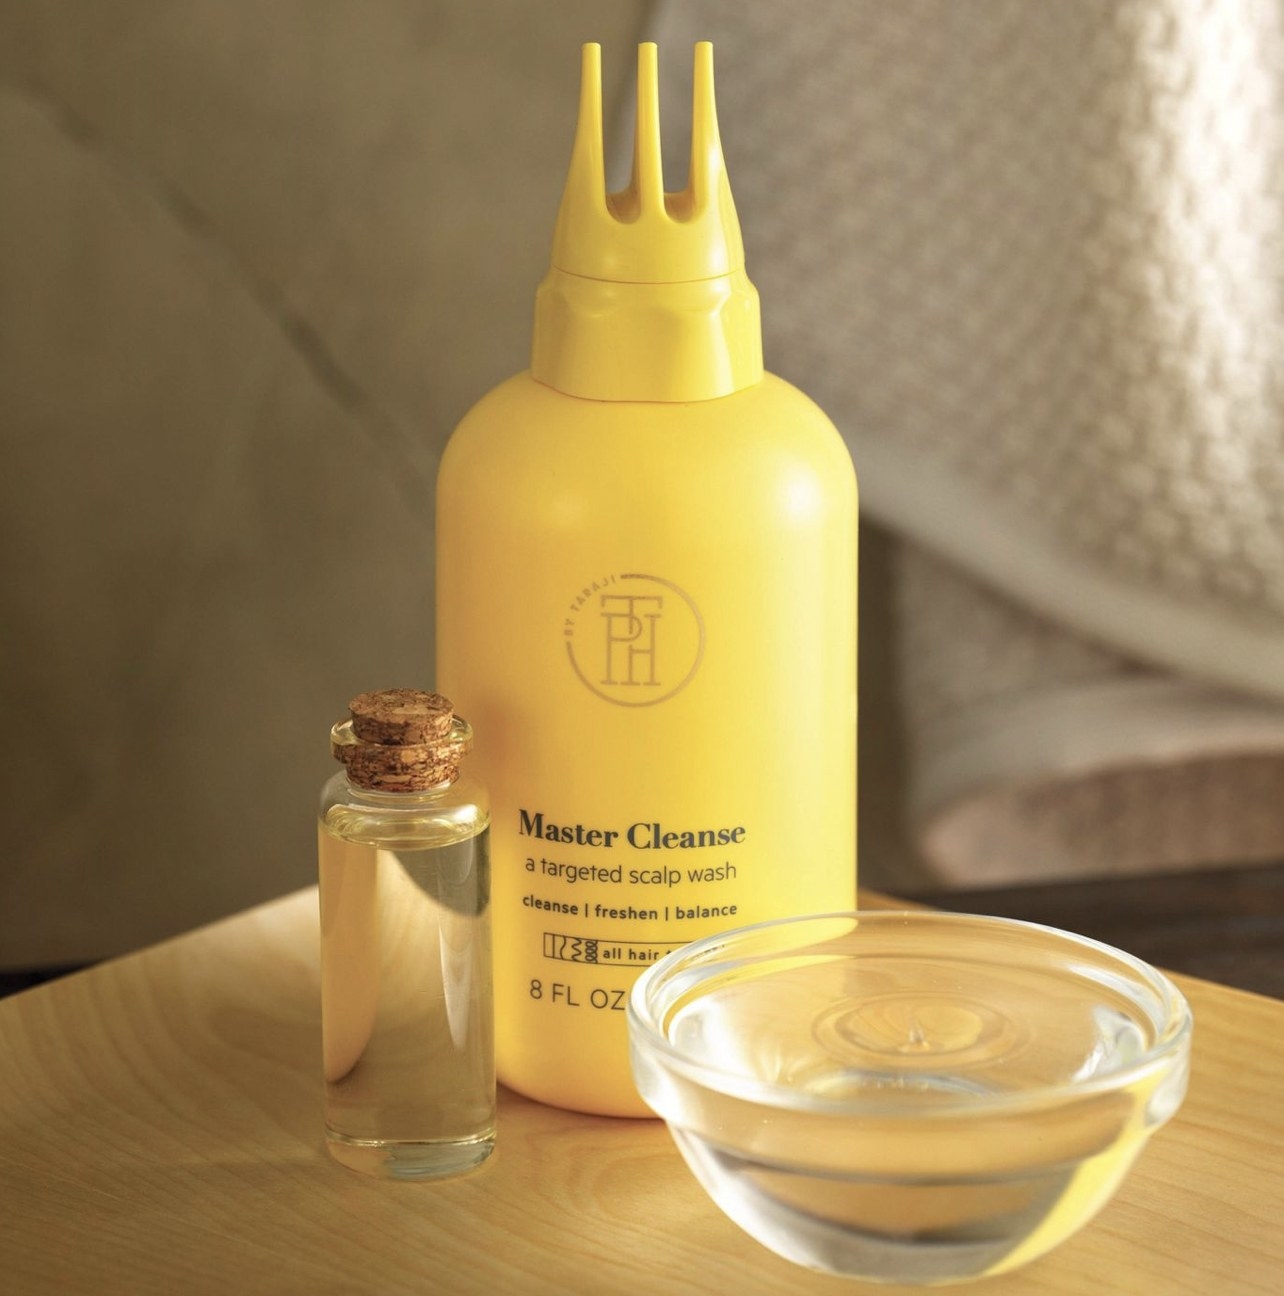 A yellow bottle of hair treatment